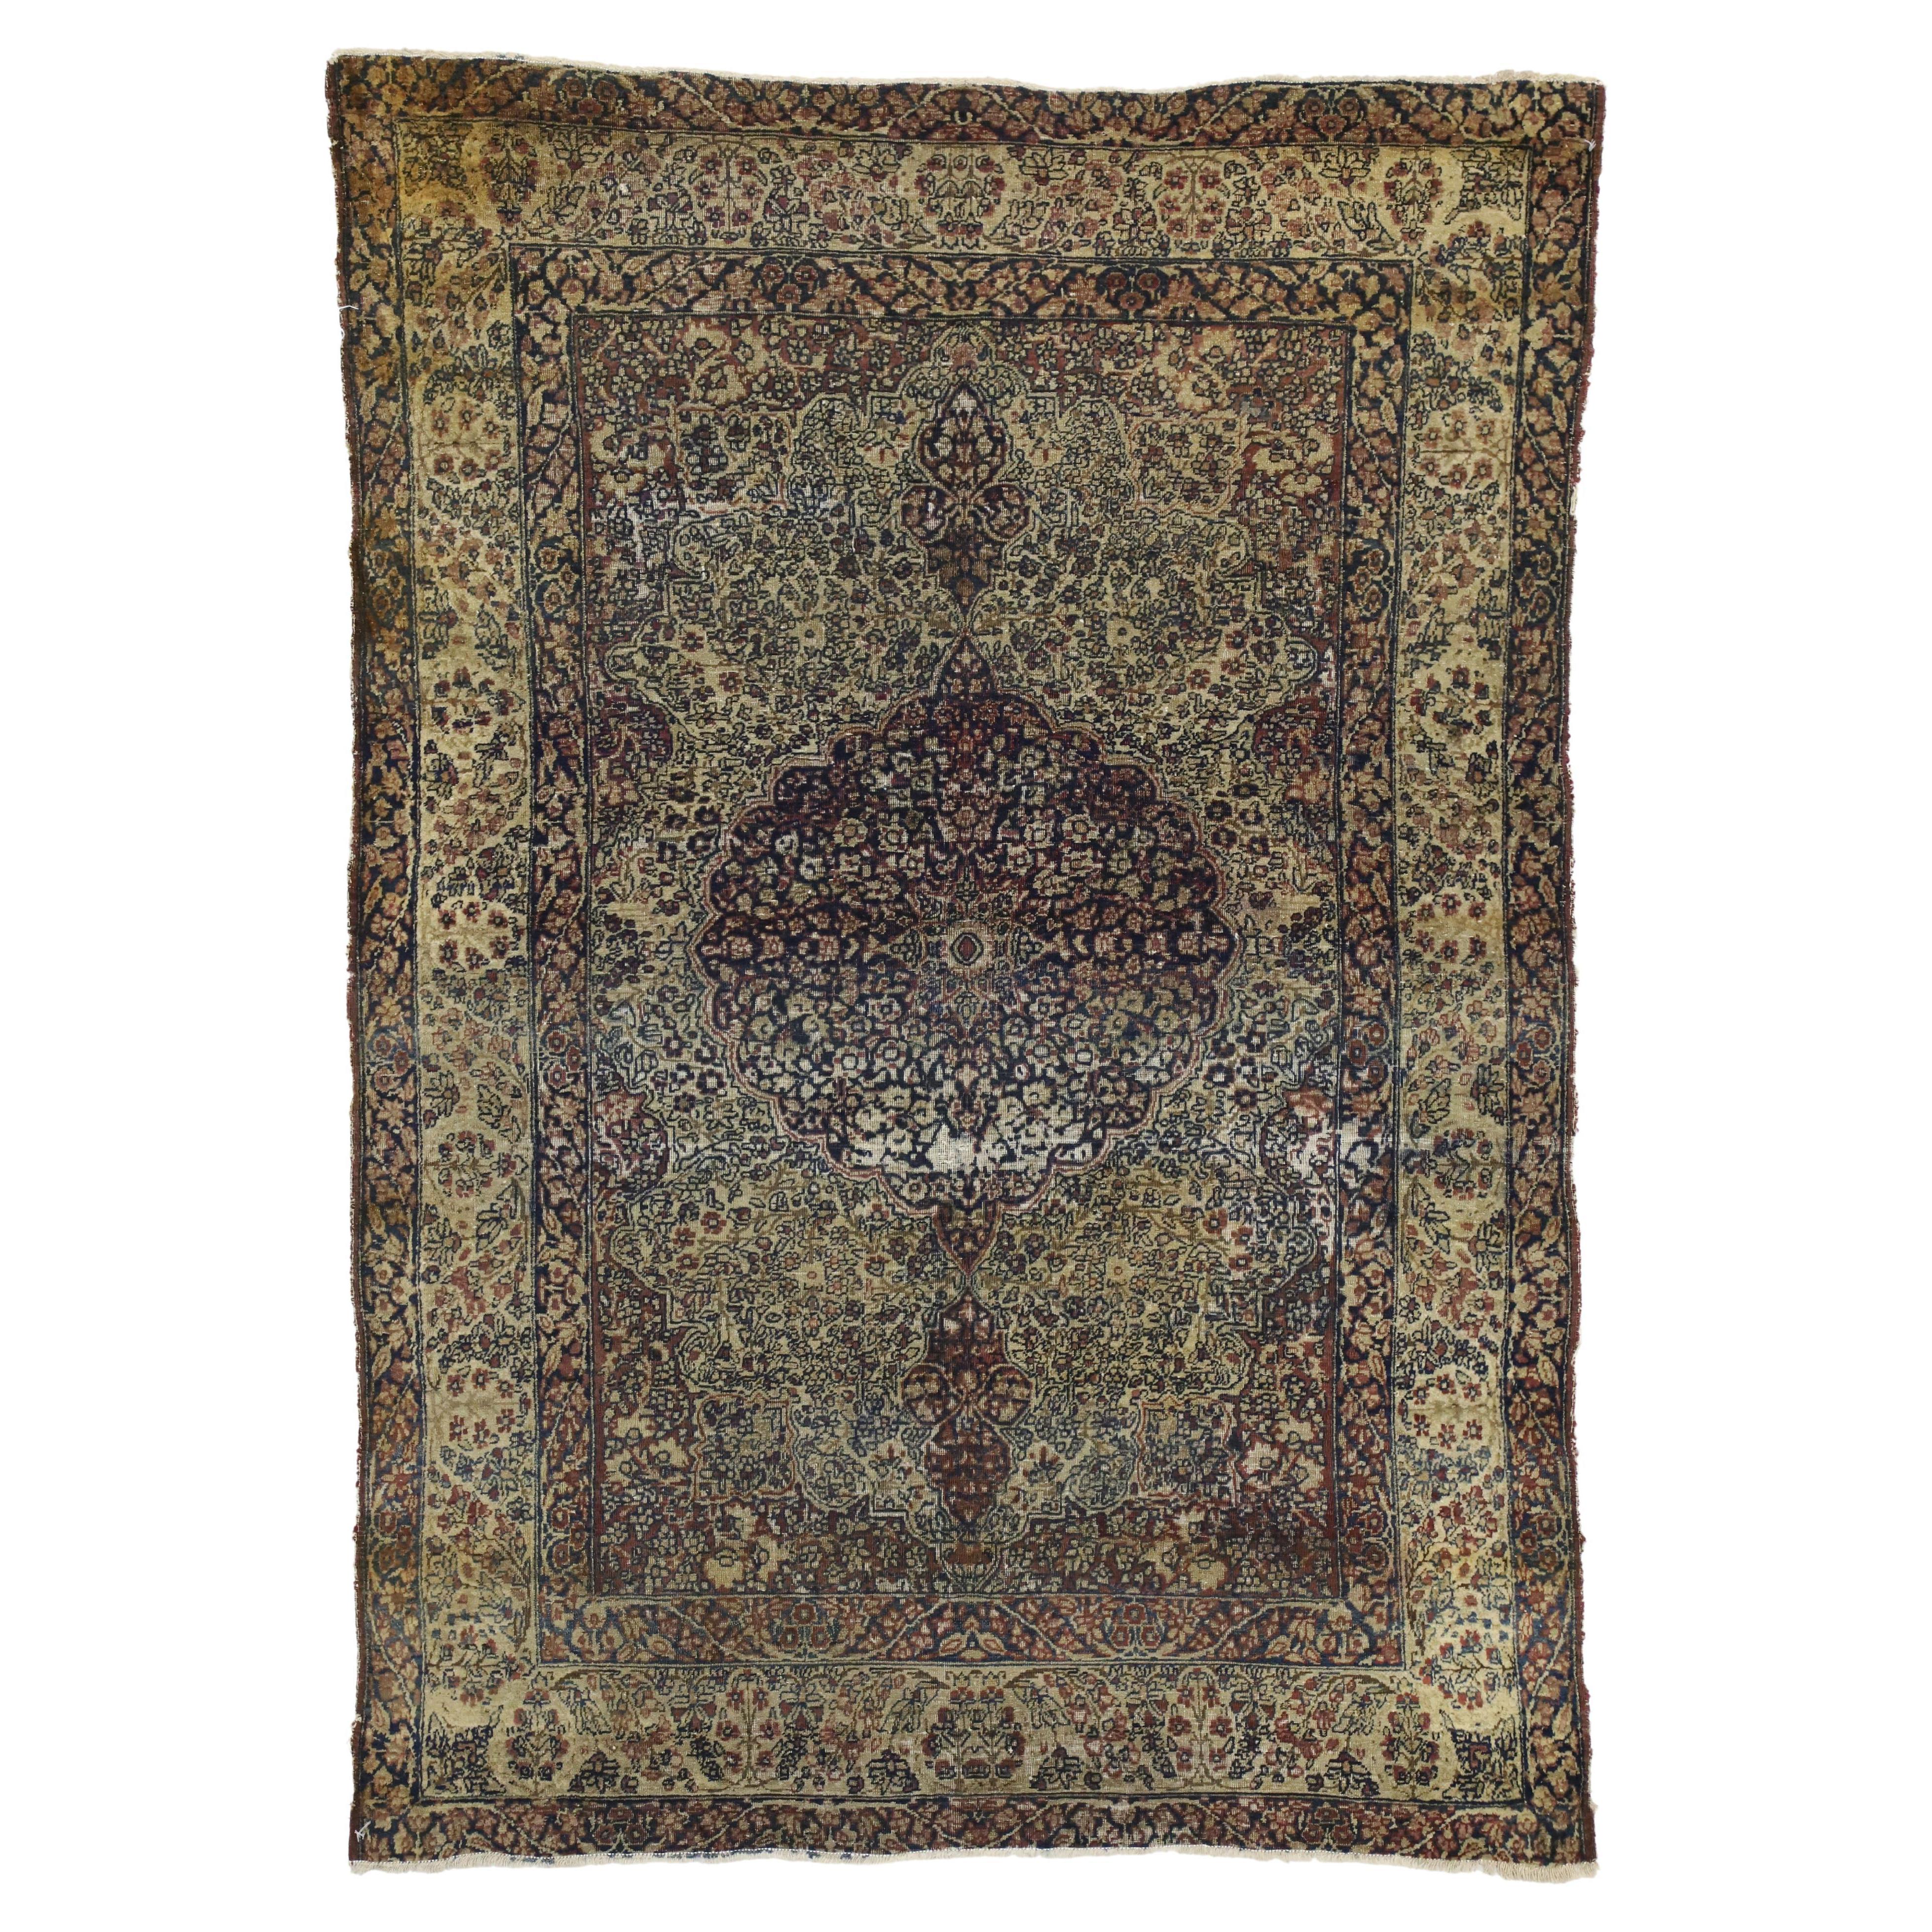 Distressed Antique Kermanshah Persian Rug with Rustic English Style For Sale